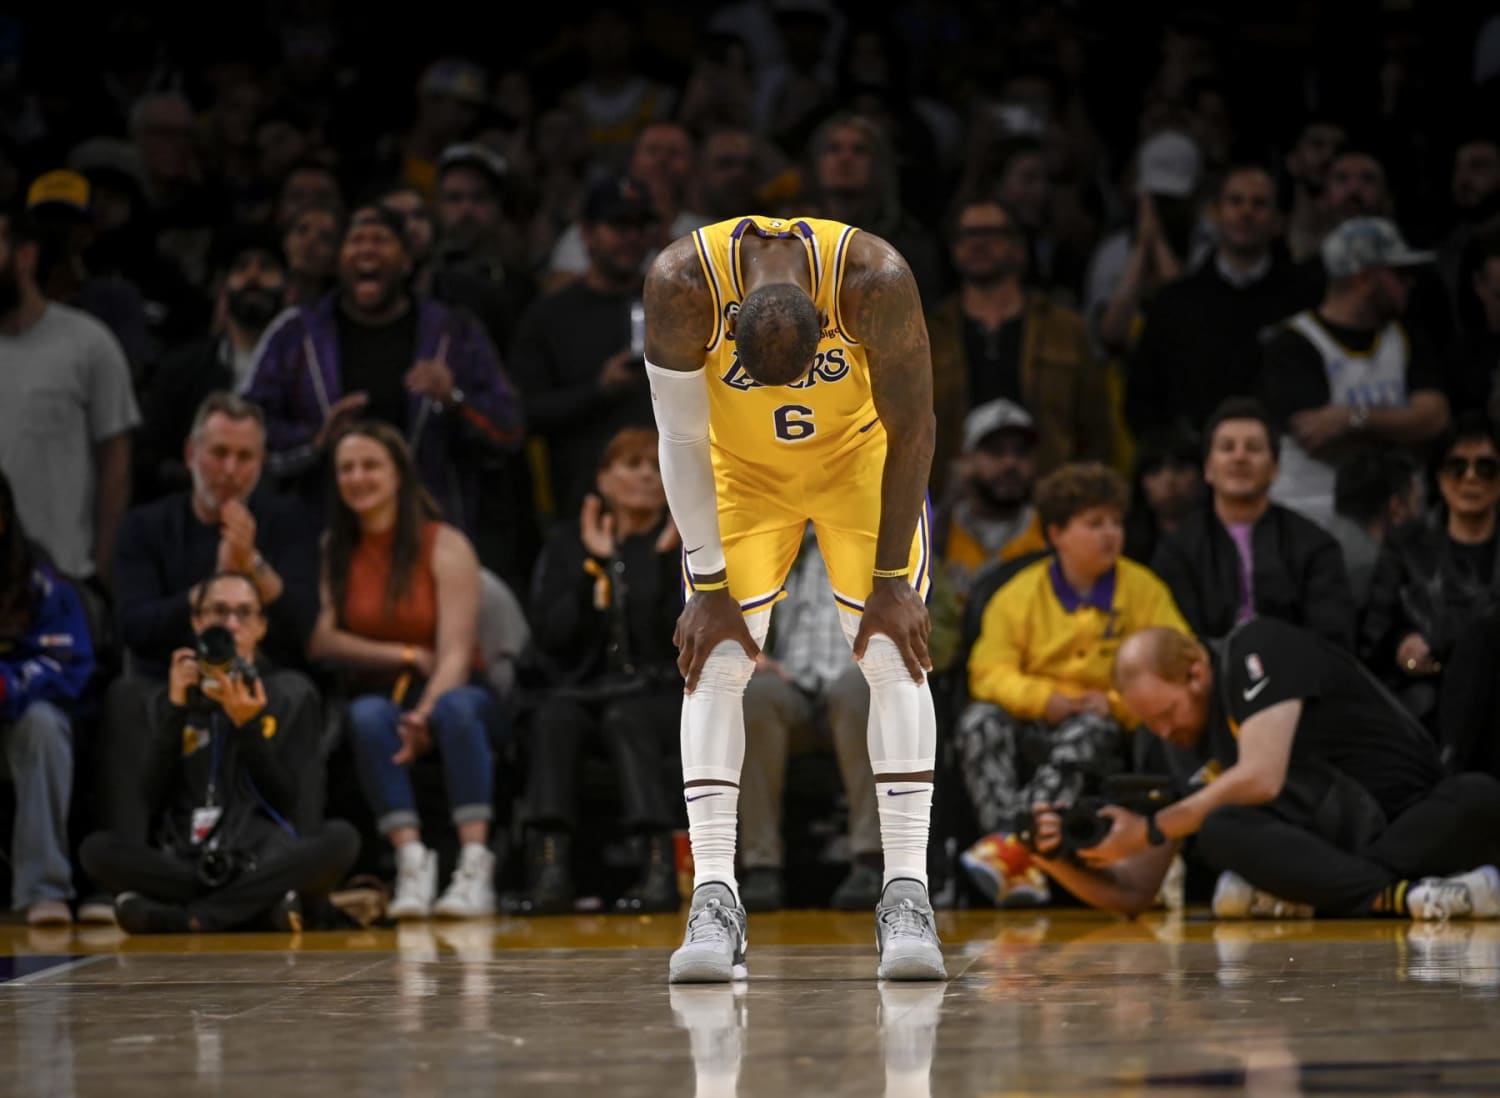 LeBron James Announces Nike LeBron 17 'Future Air' Sneakers in Lakers  Colorway - Lakers Daily